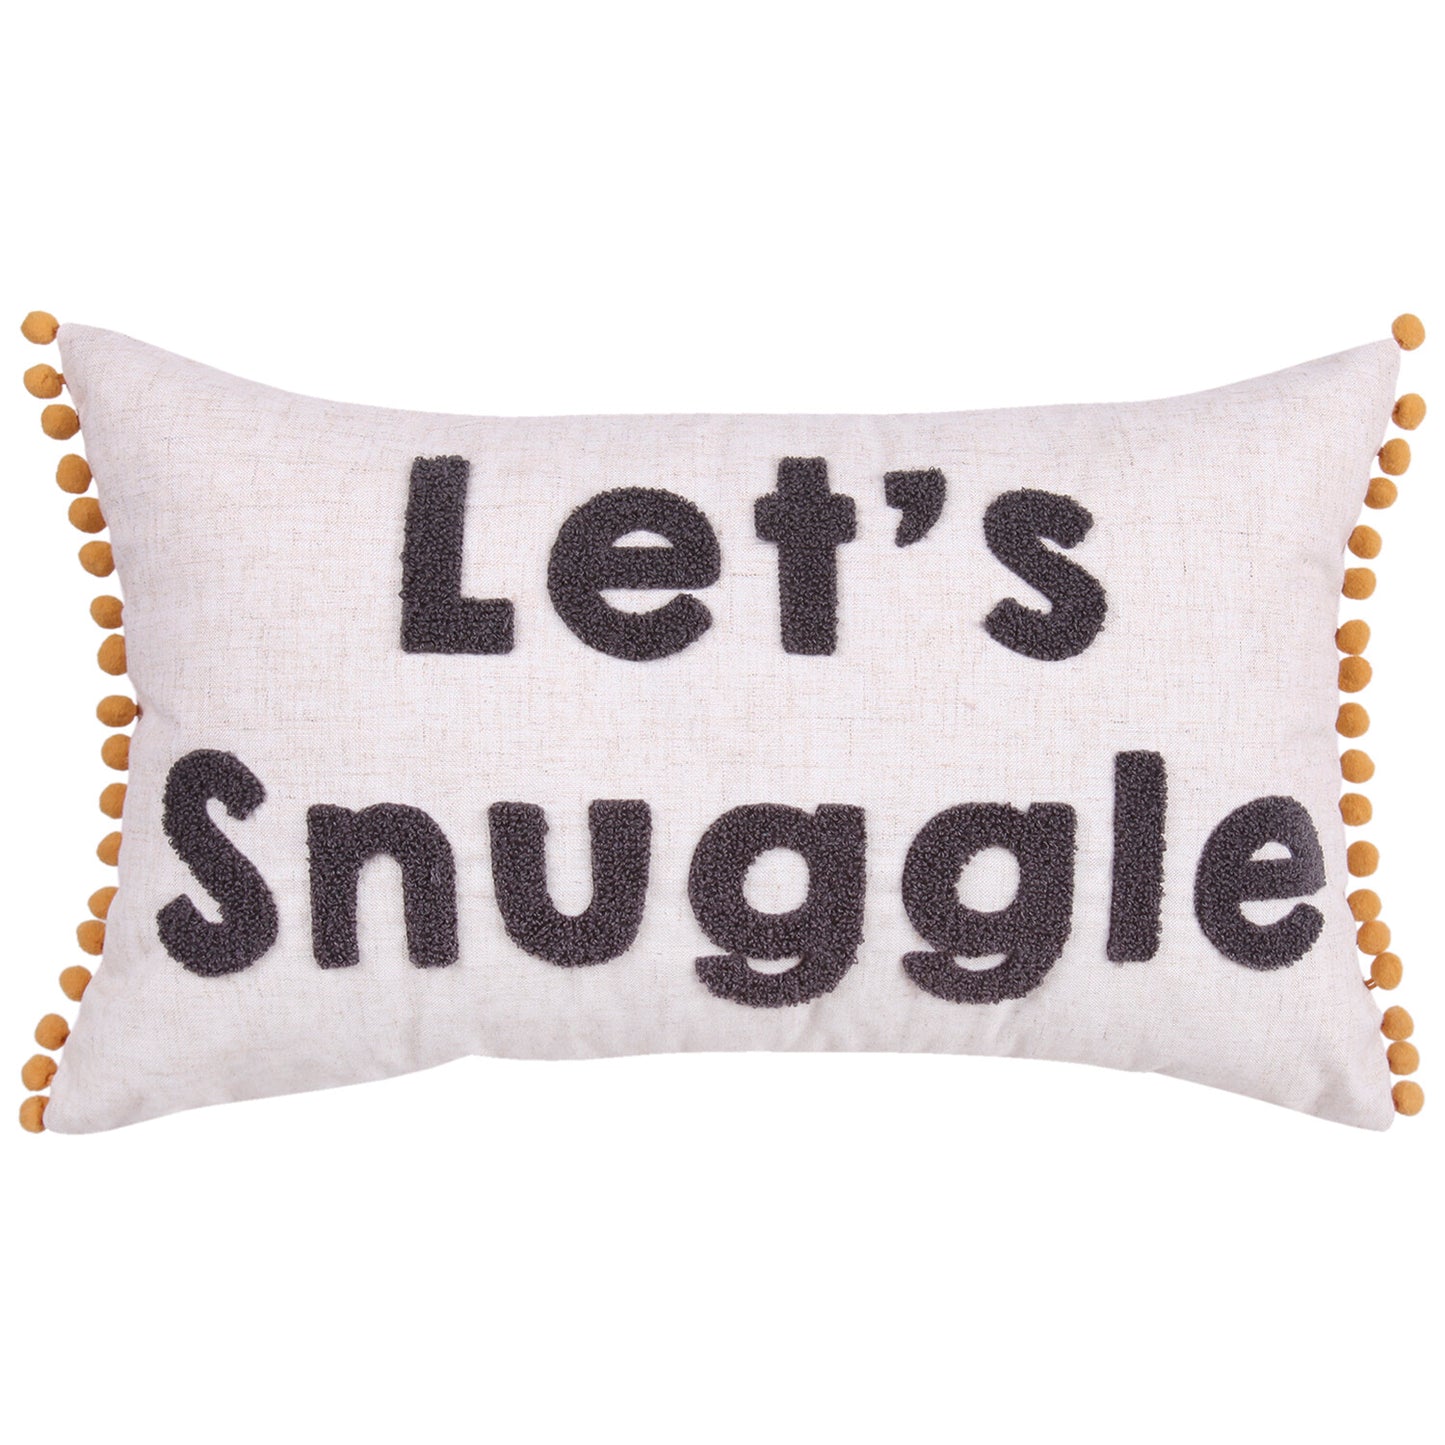 Snuggle set-Authentically Radd Women's Online Boutique in Endwell, New York